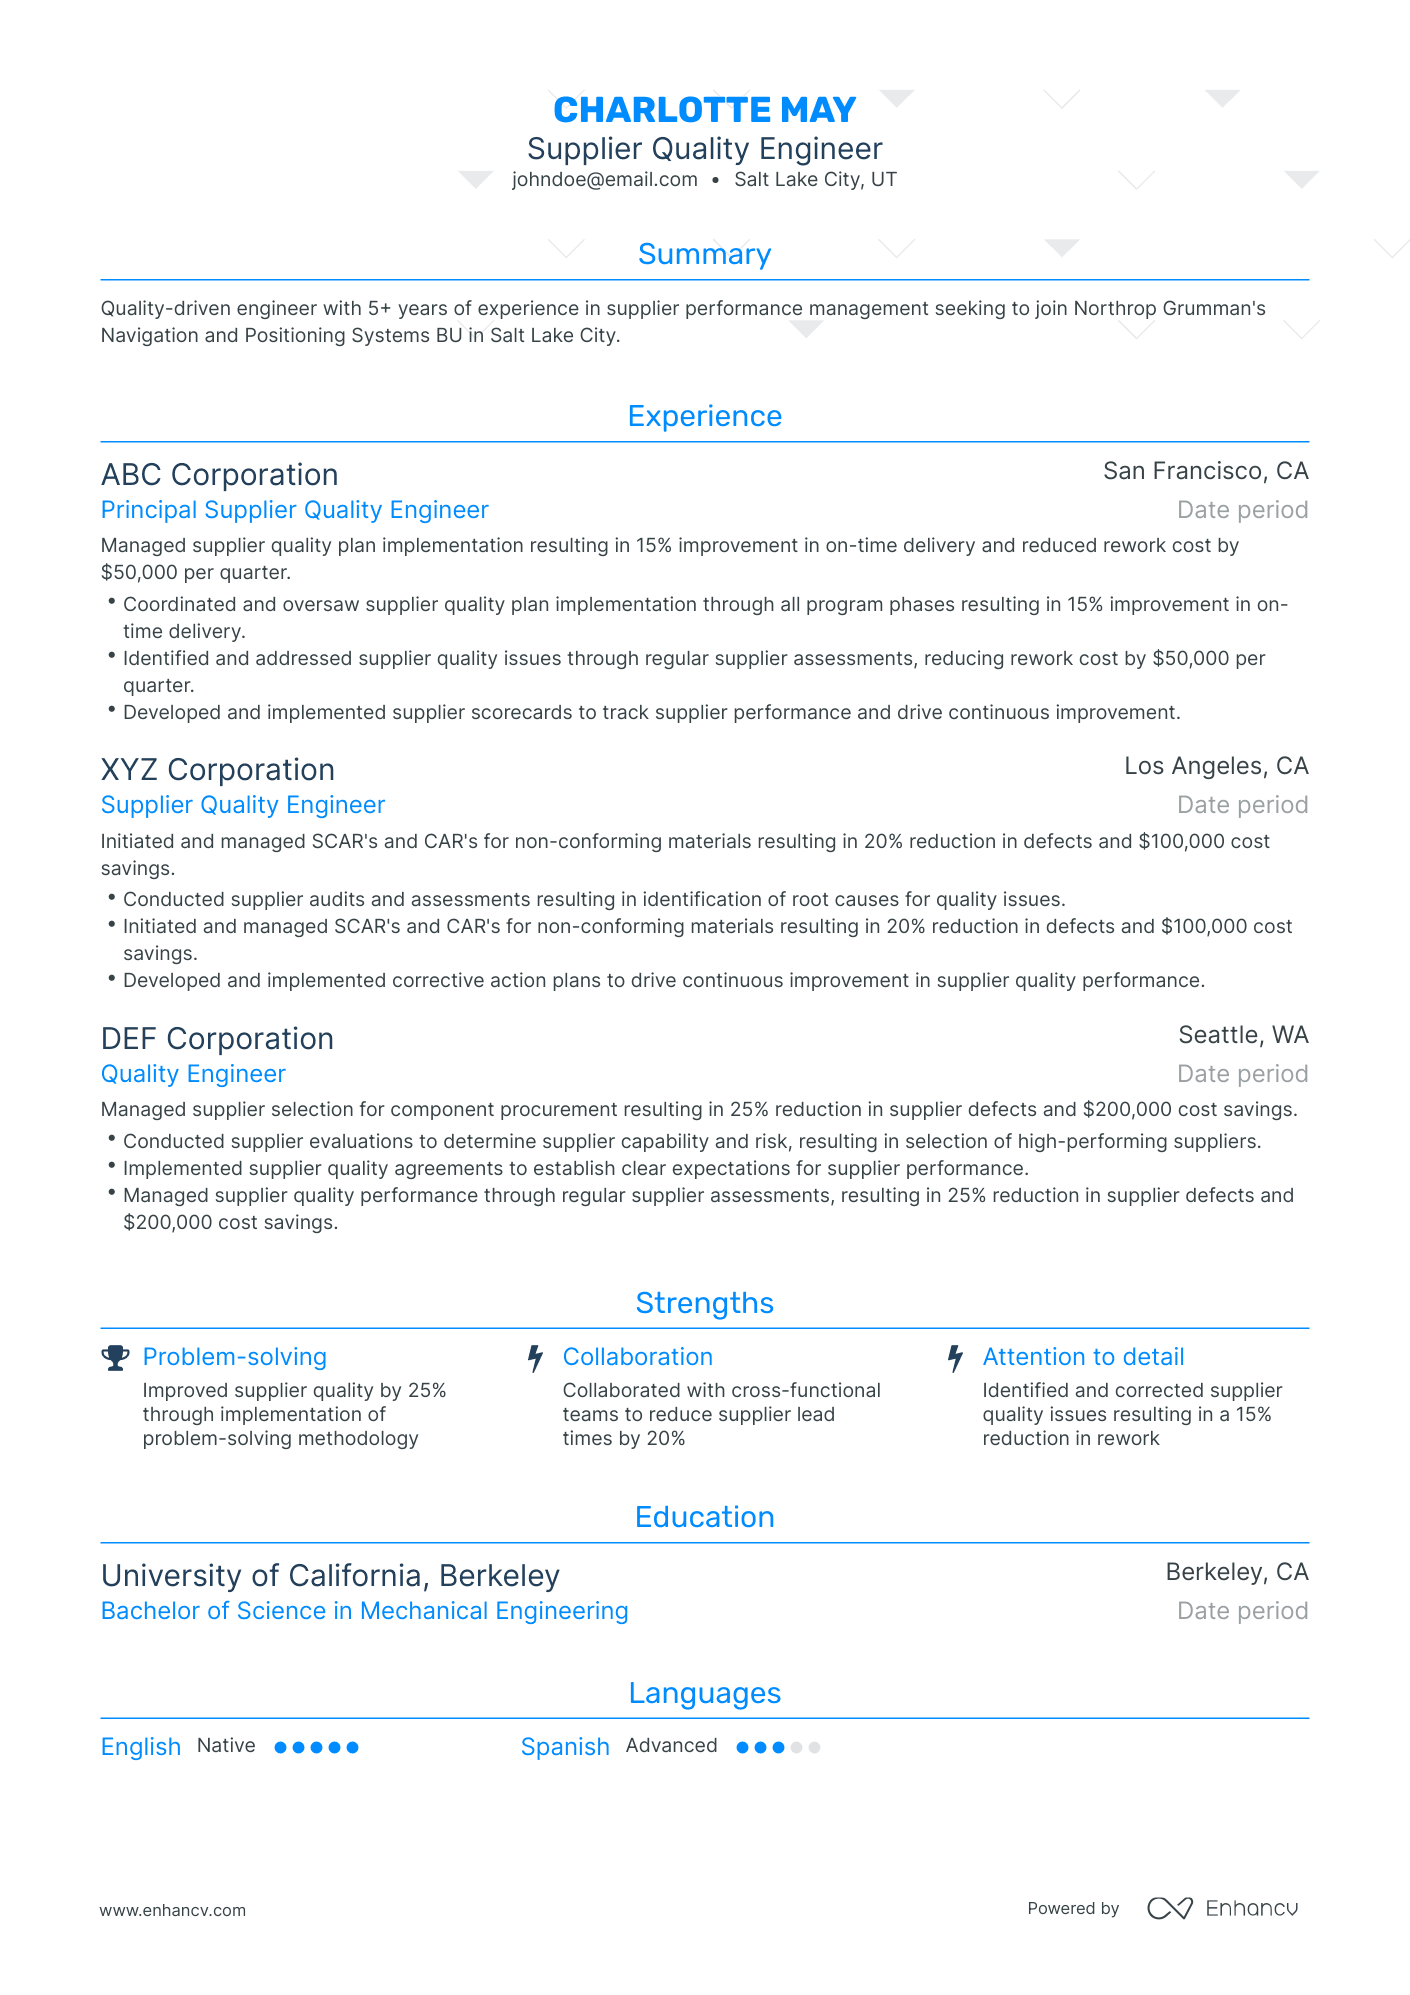 Traditional Supplier Quality Engineer Resume Template